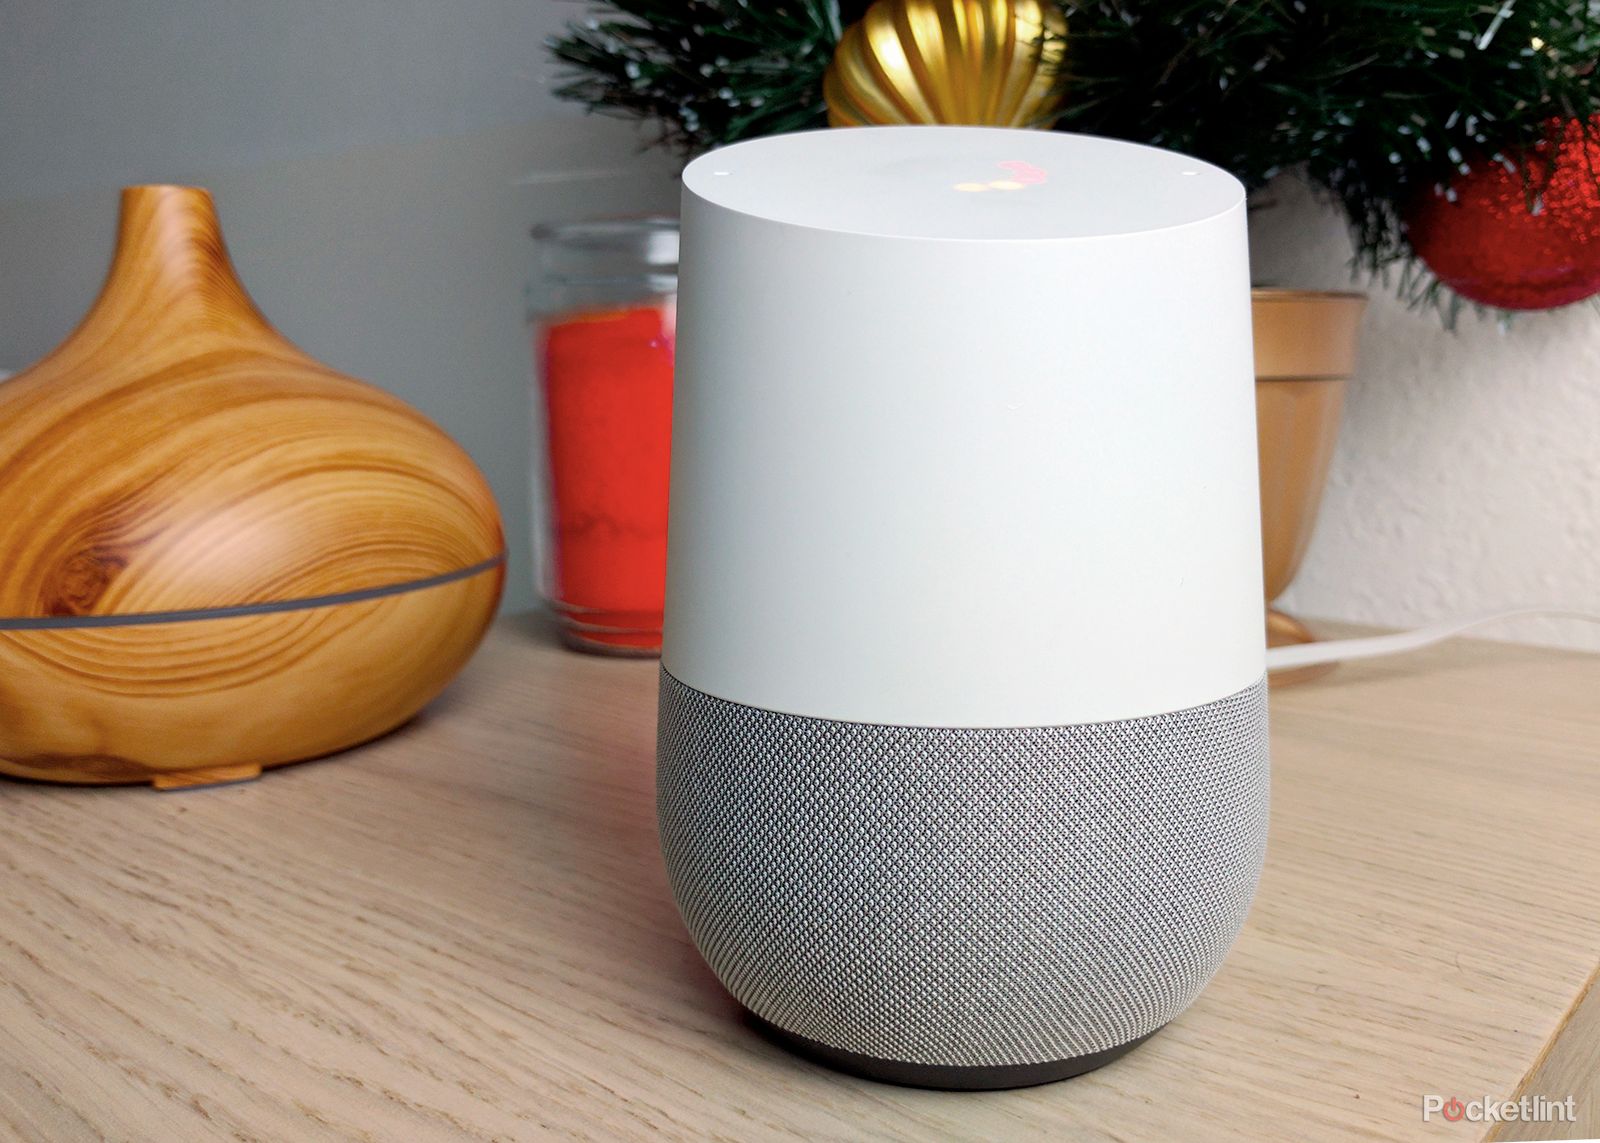 Google Home Express shopping: How to find and buy items using just your  voice